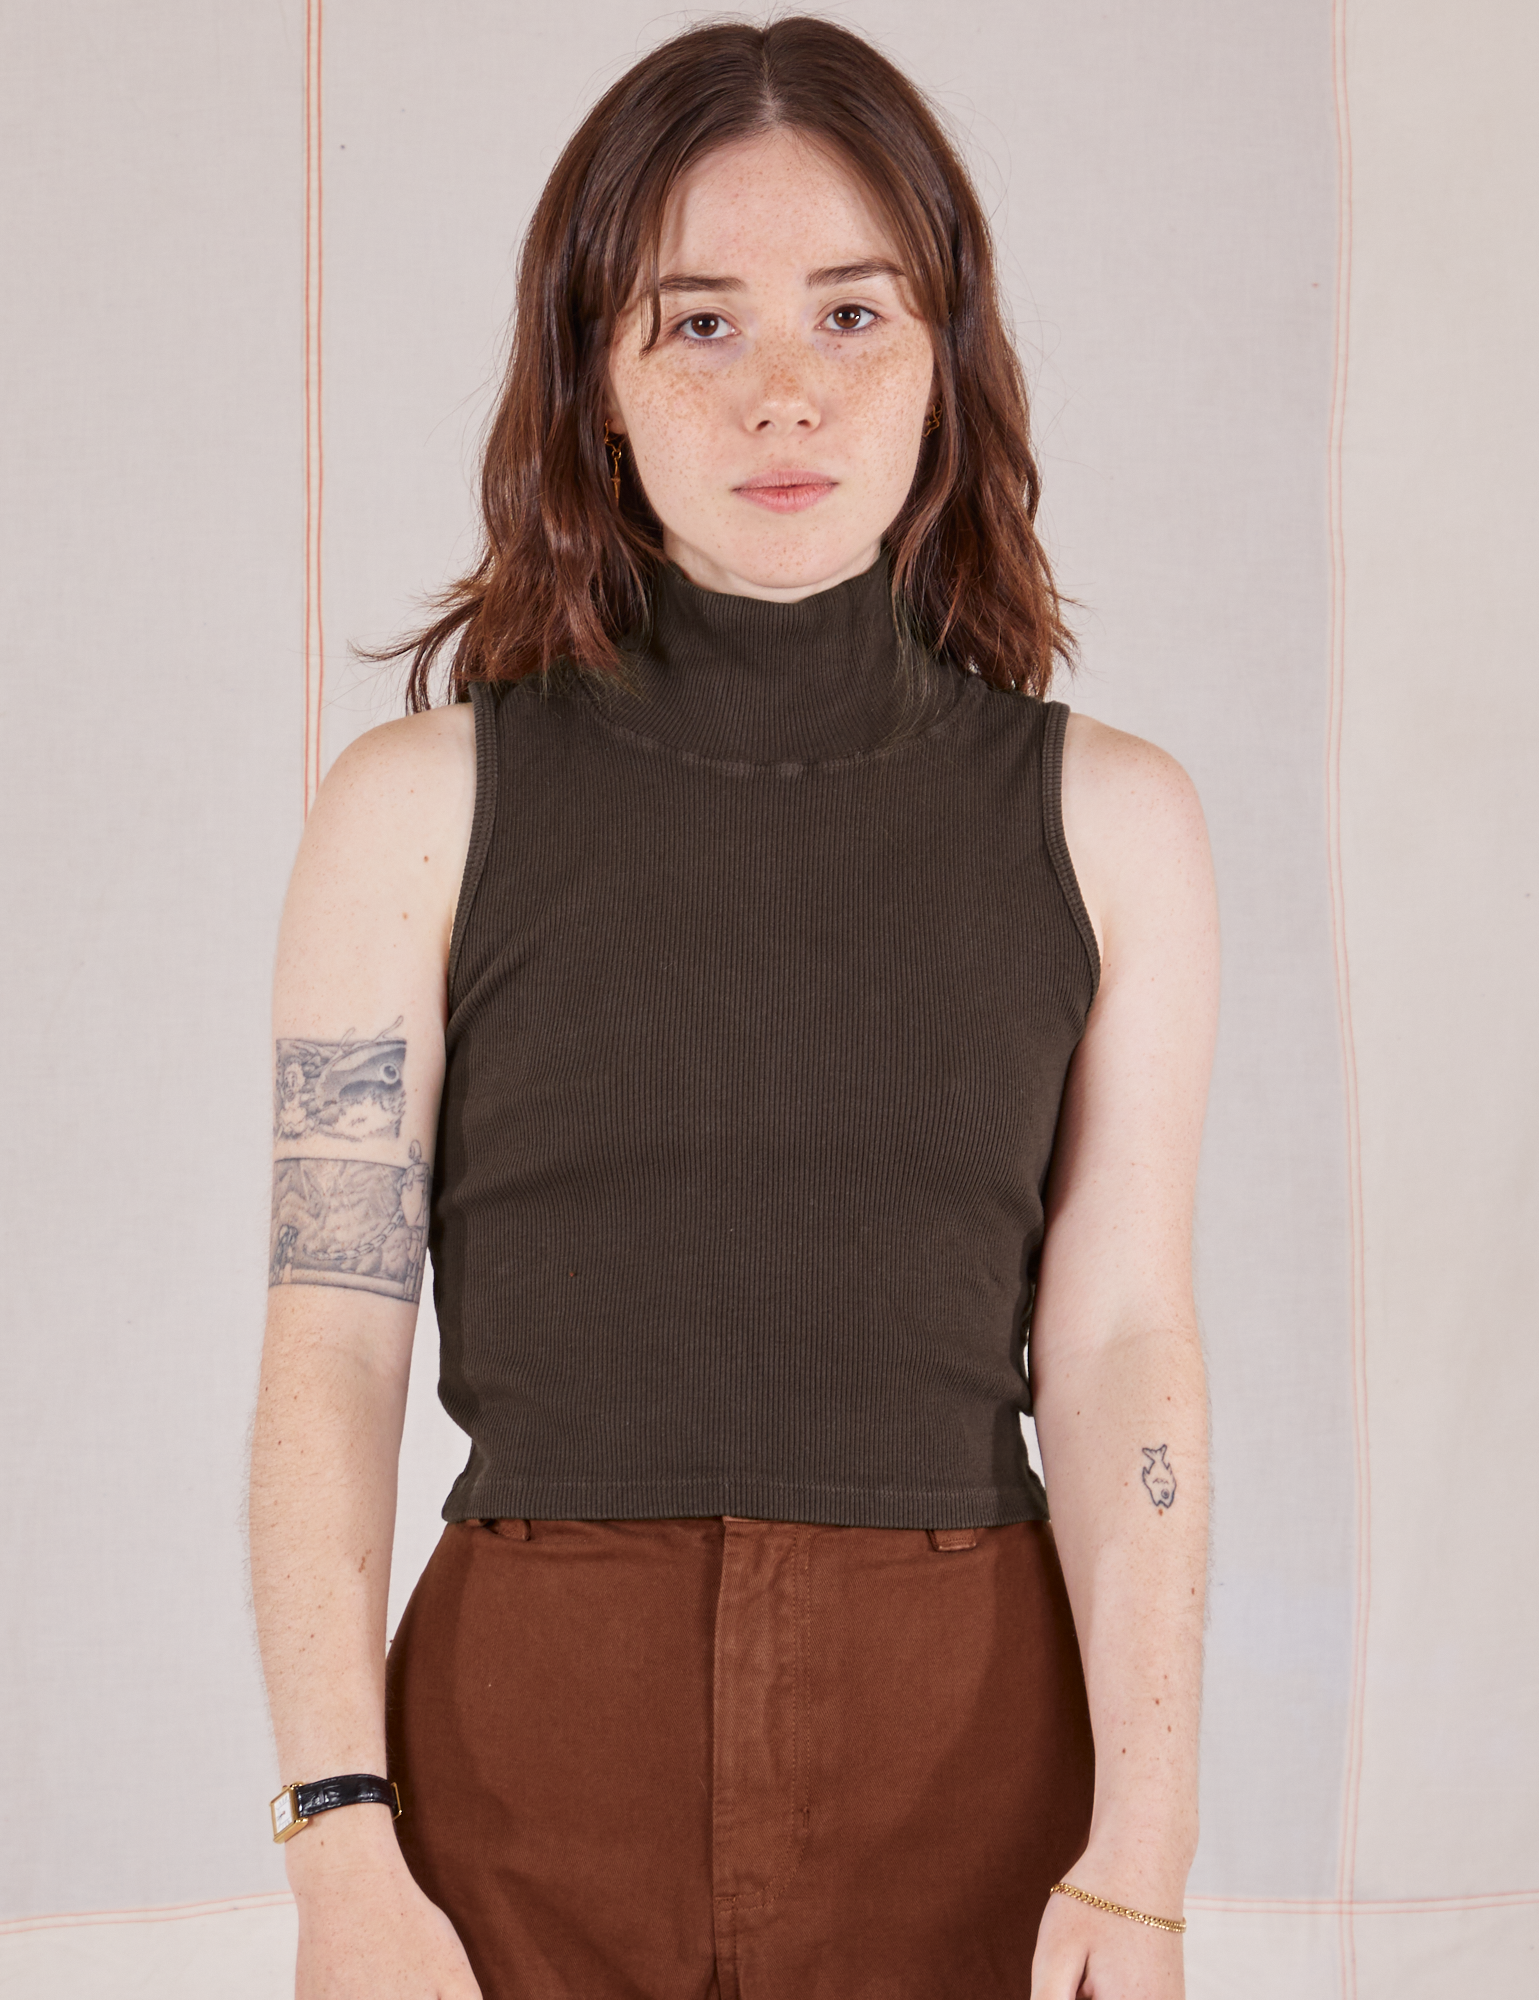 Hana is 5&#39;3&quot; and wearing P Sleeveless Essential Turtleneck in Espresso Brown